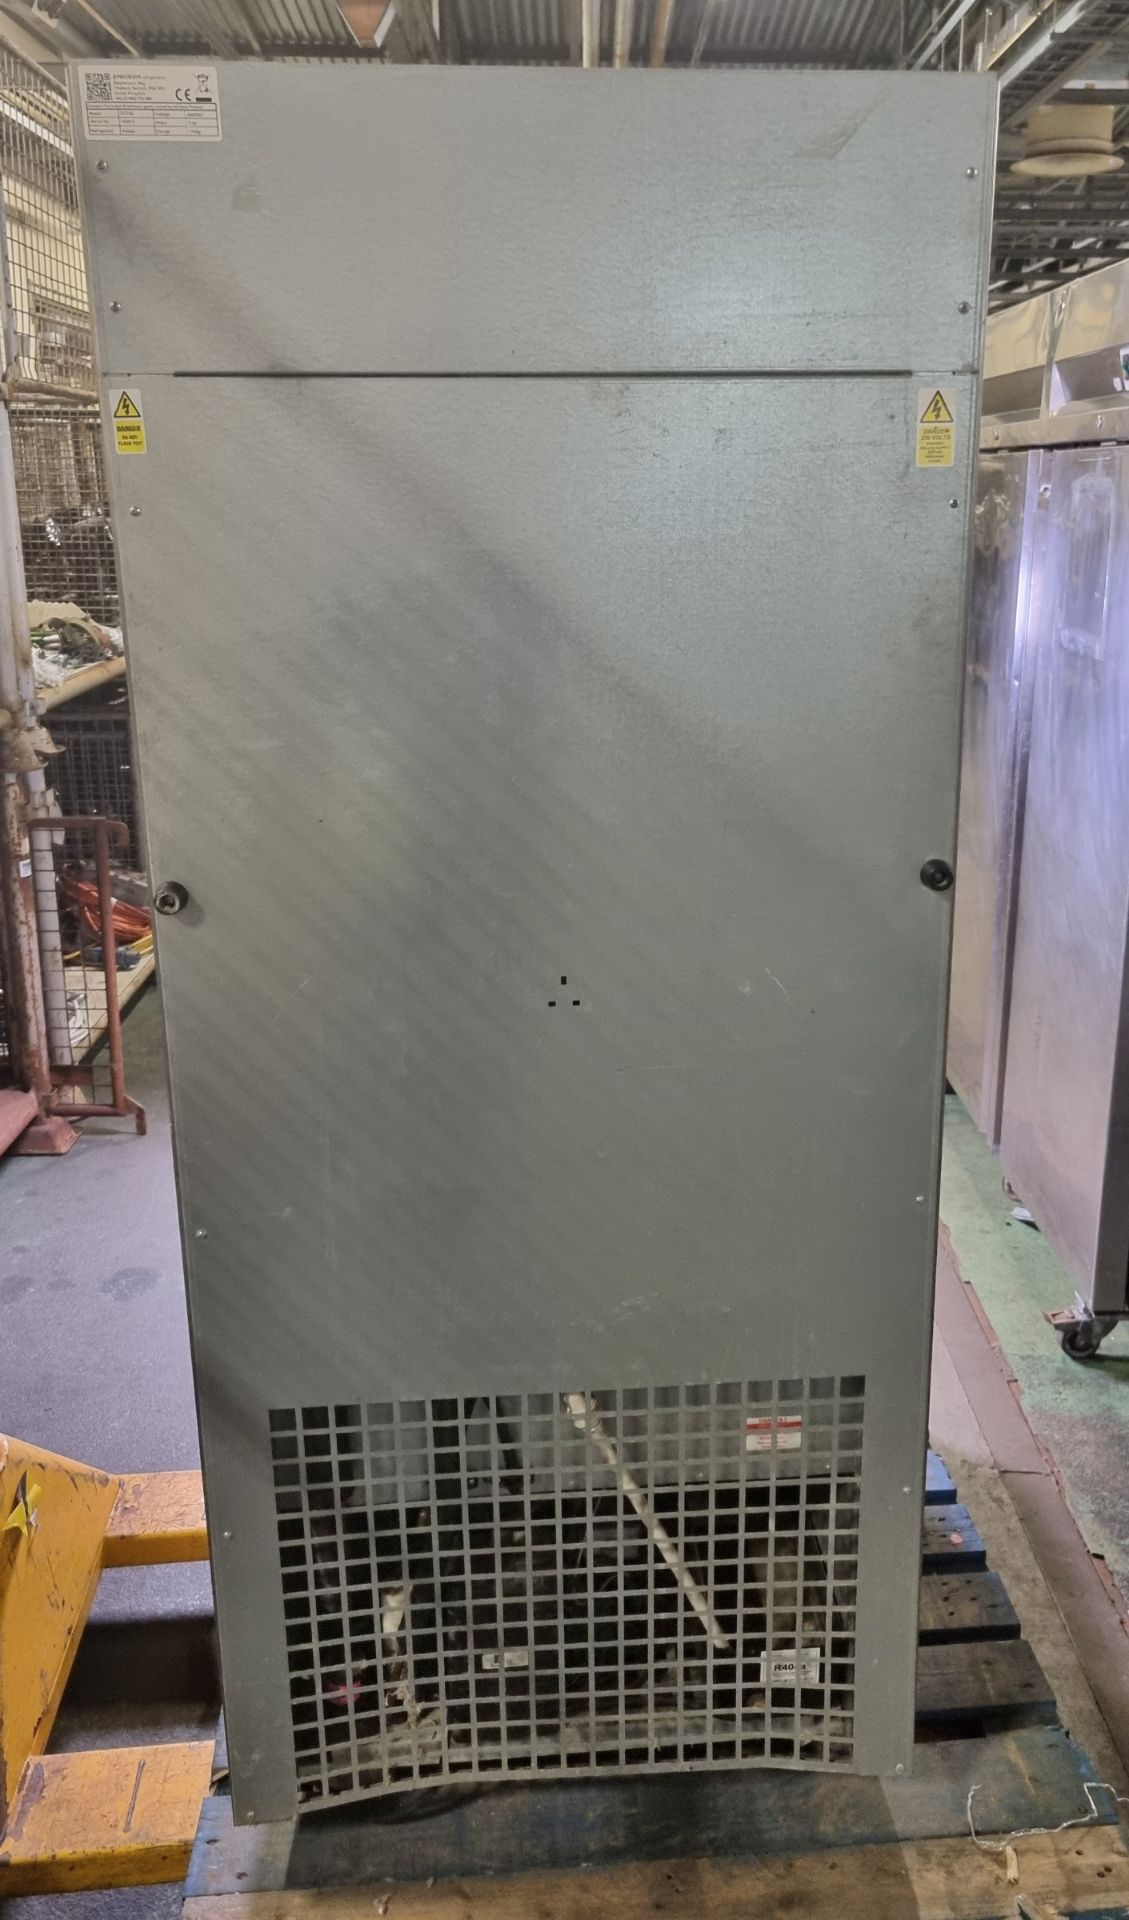 Precision PCF40 upright blast chiller - W 720 x D 820 x H 1770mm - Image 3 of 5